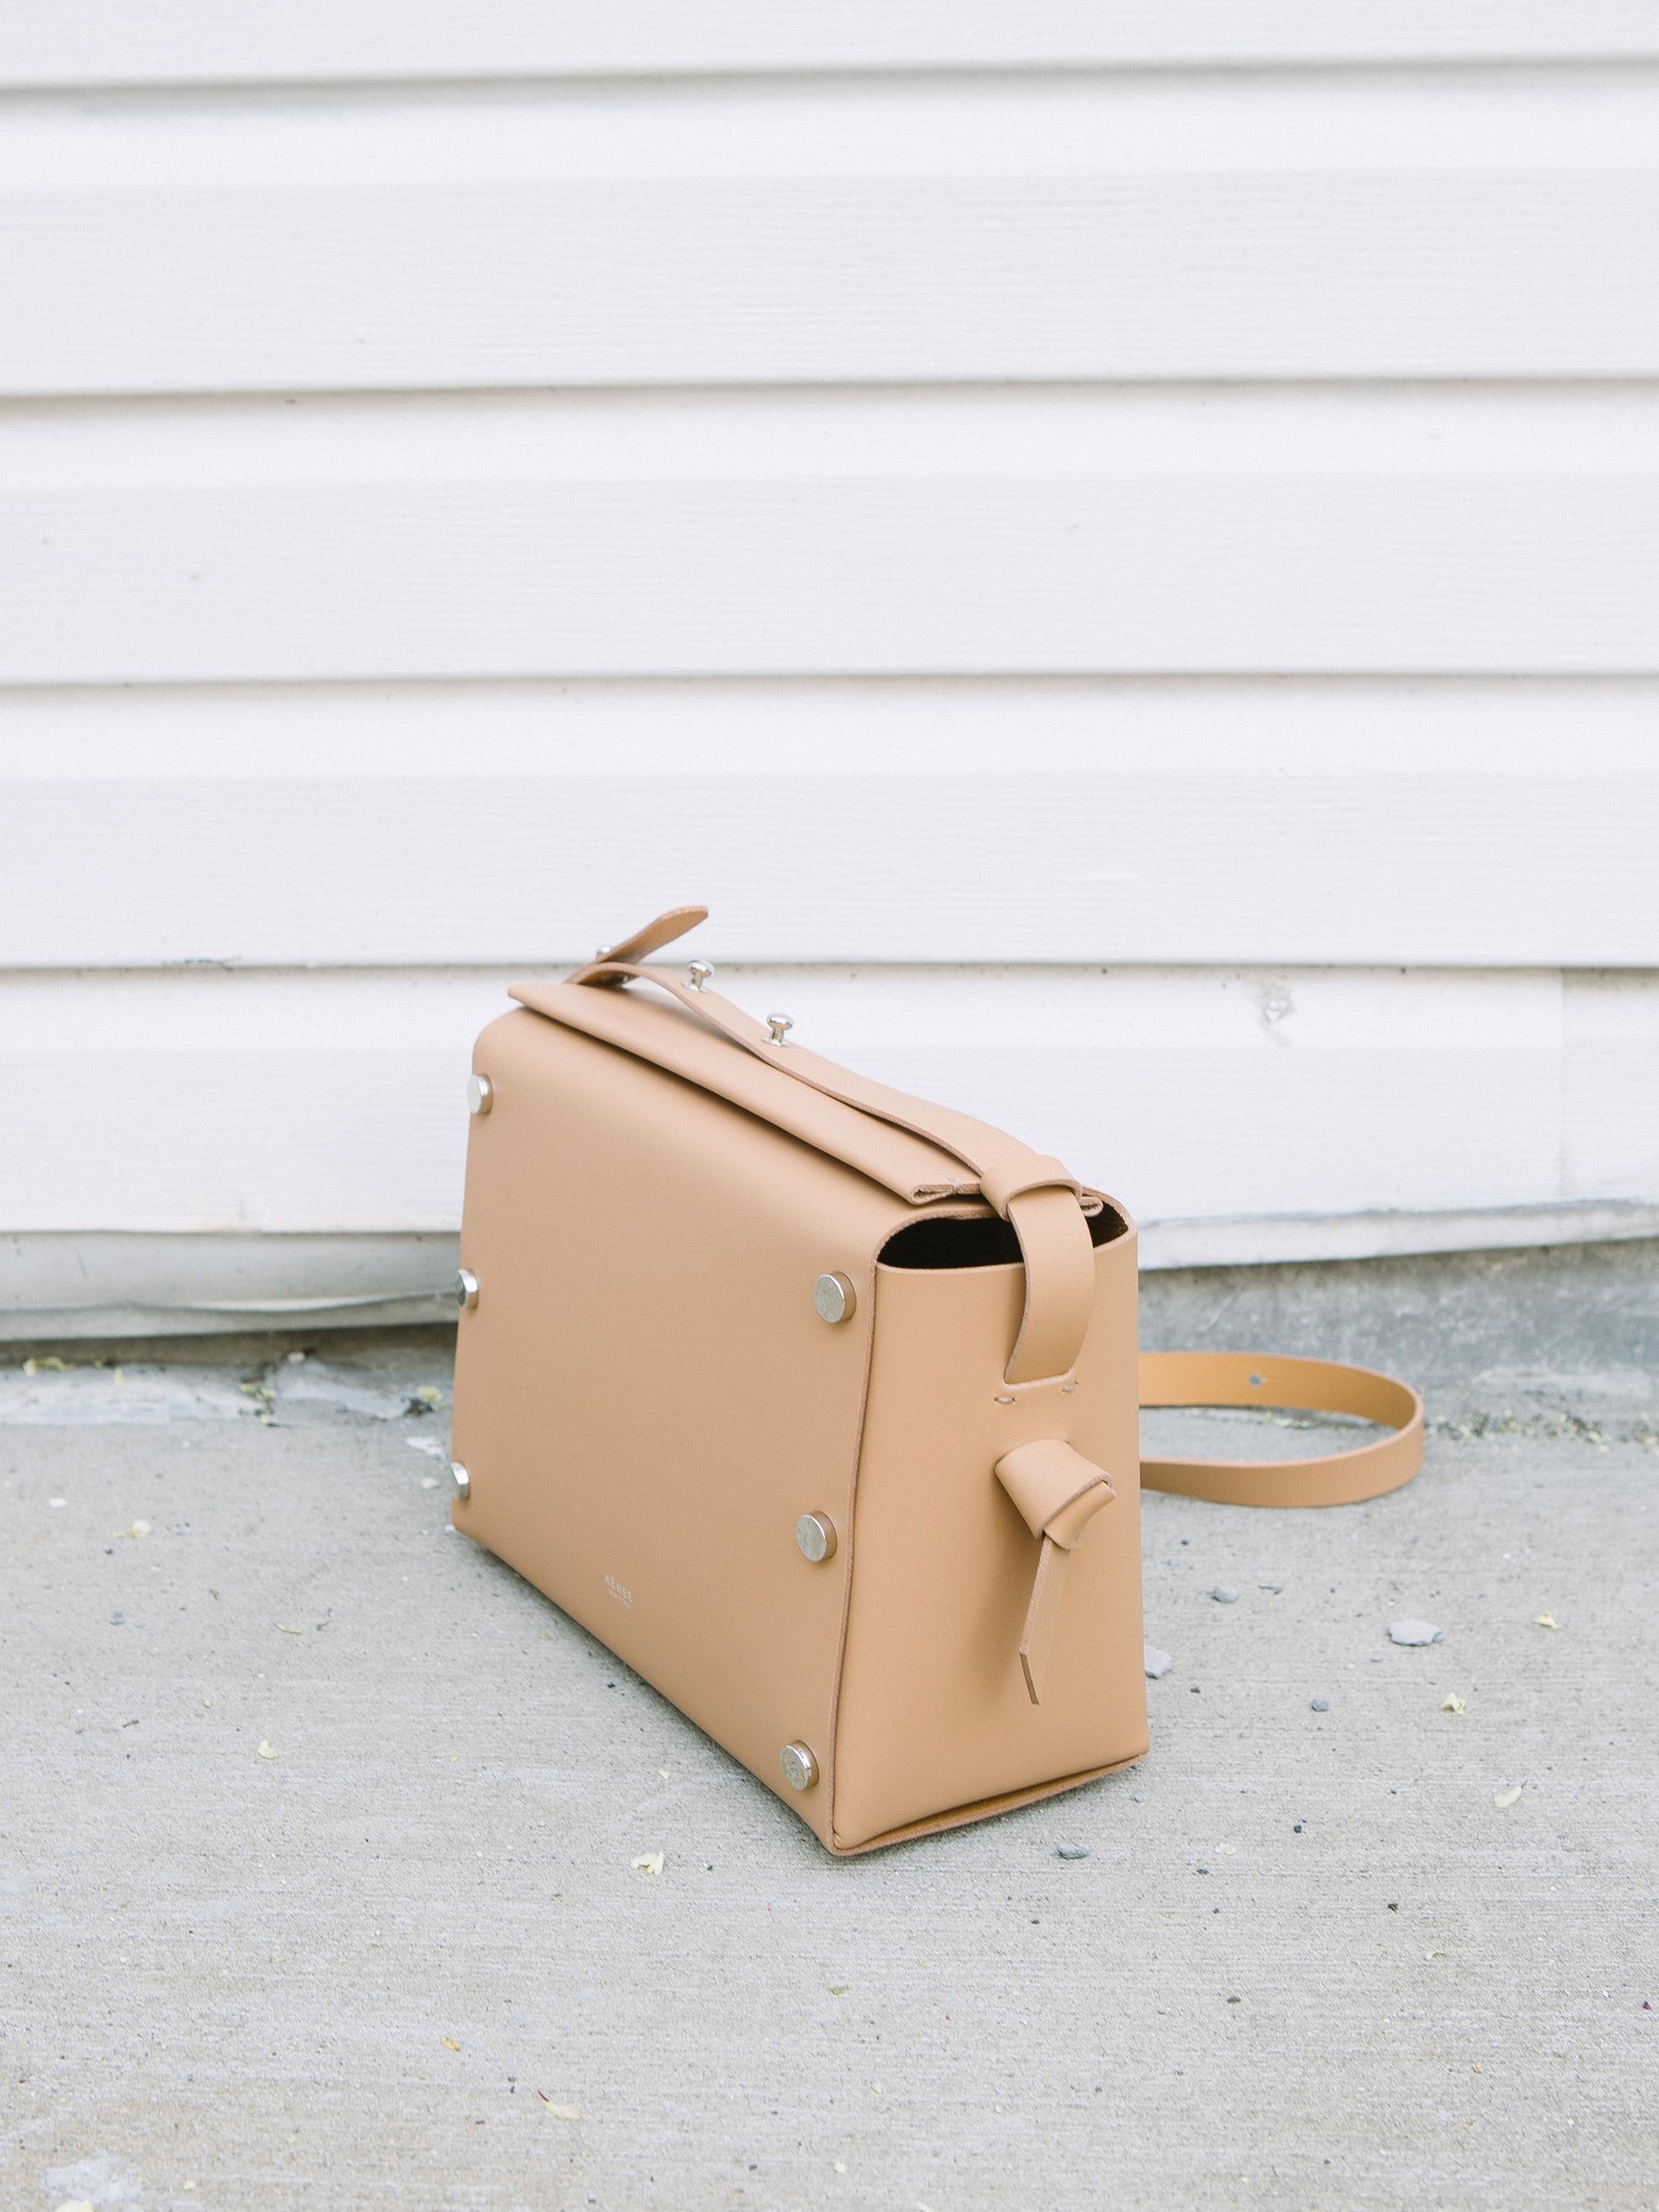 Chic beige crossbody bag and shoulder bag with adjustable strap crafted from Italian vegetable tanned leather for a minimal yet sophisticated look.